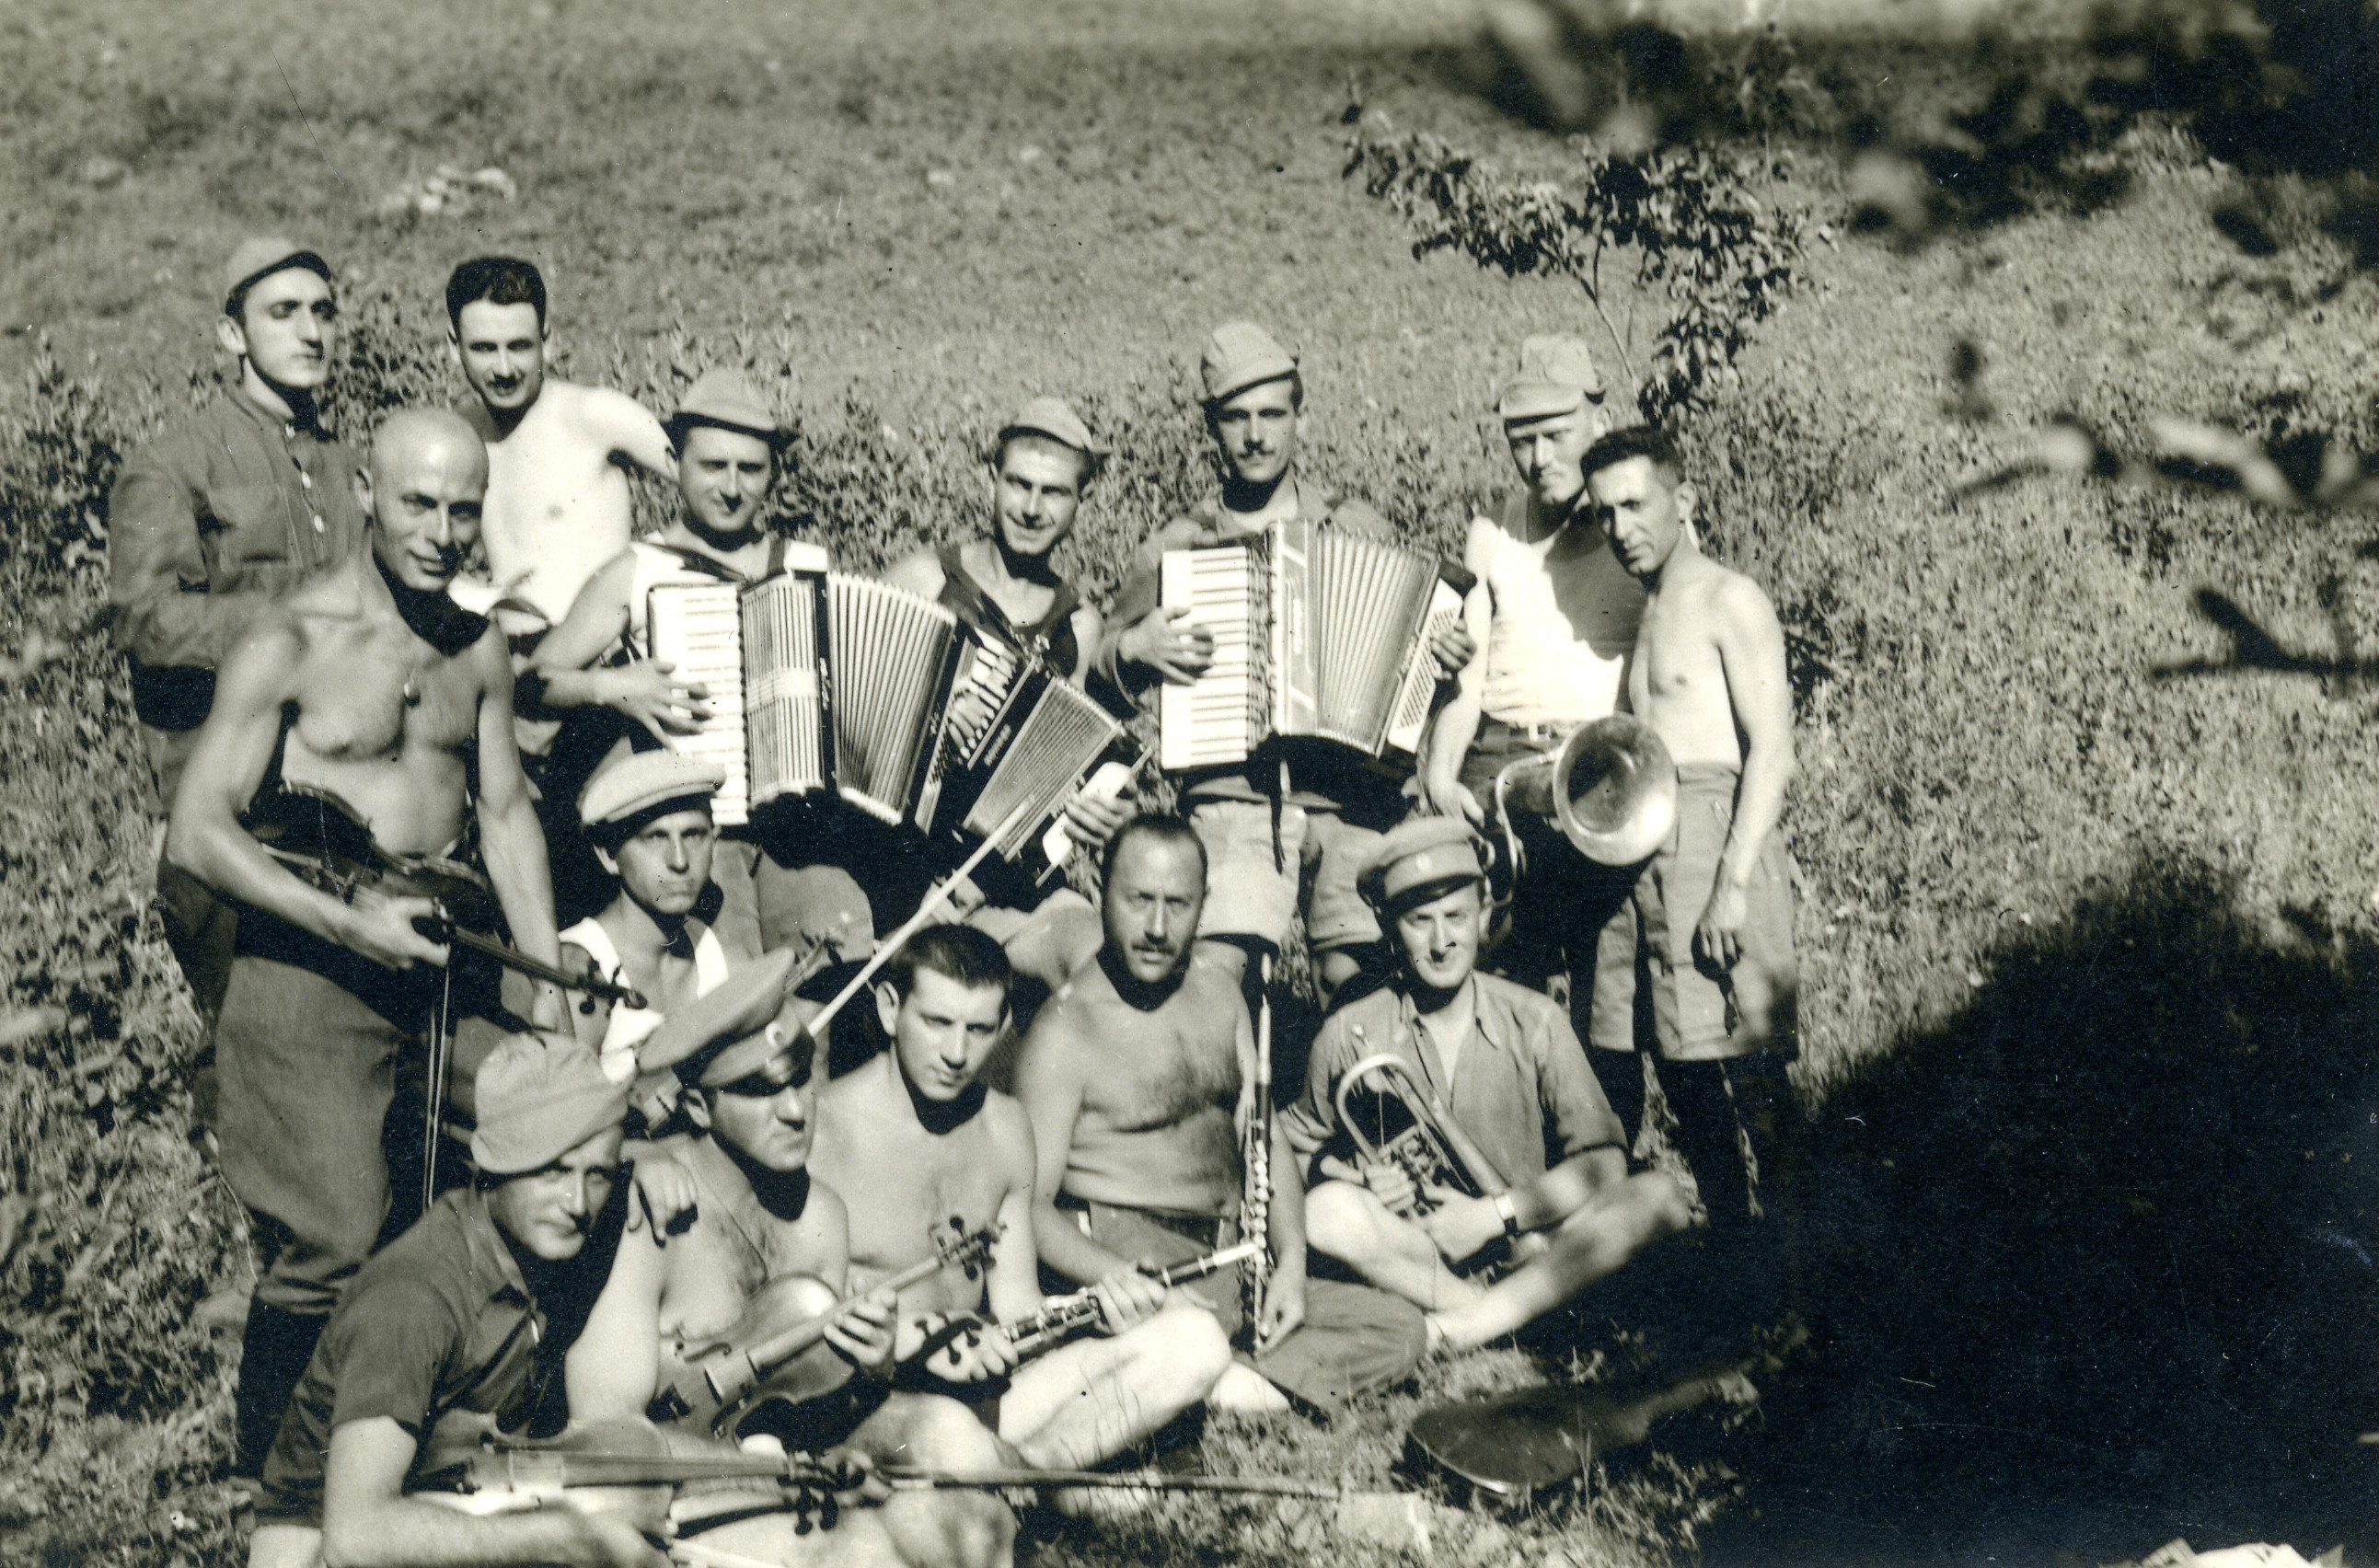 Group portrait of Bulgarian musicians in an unidentified location, possibly in a labor camp.

Among those pictured is Nissim Alkalay (seated in front, second from the left).